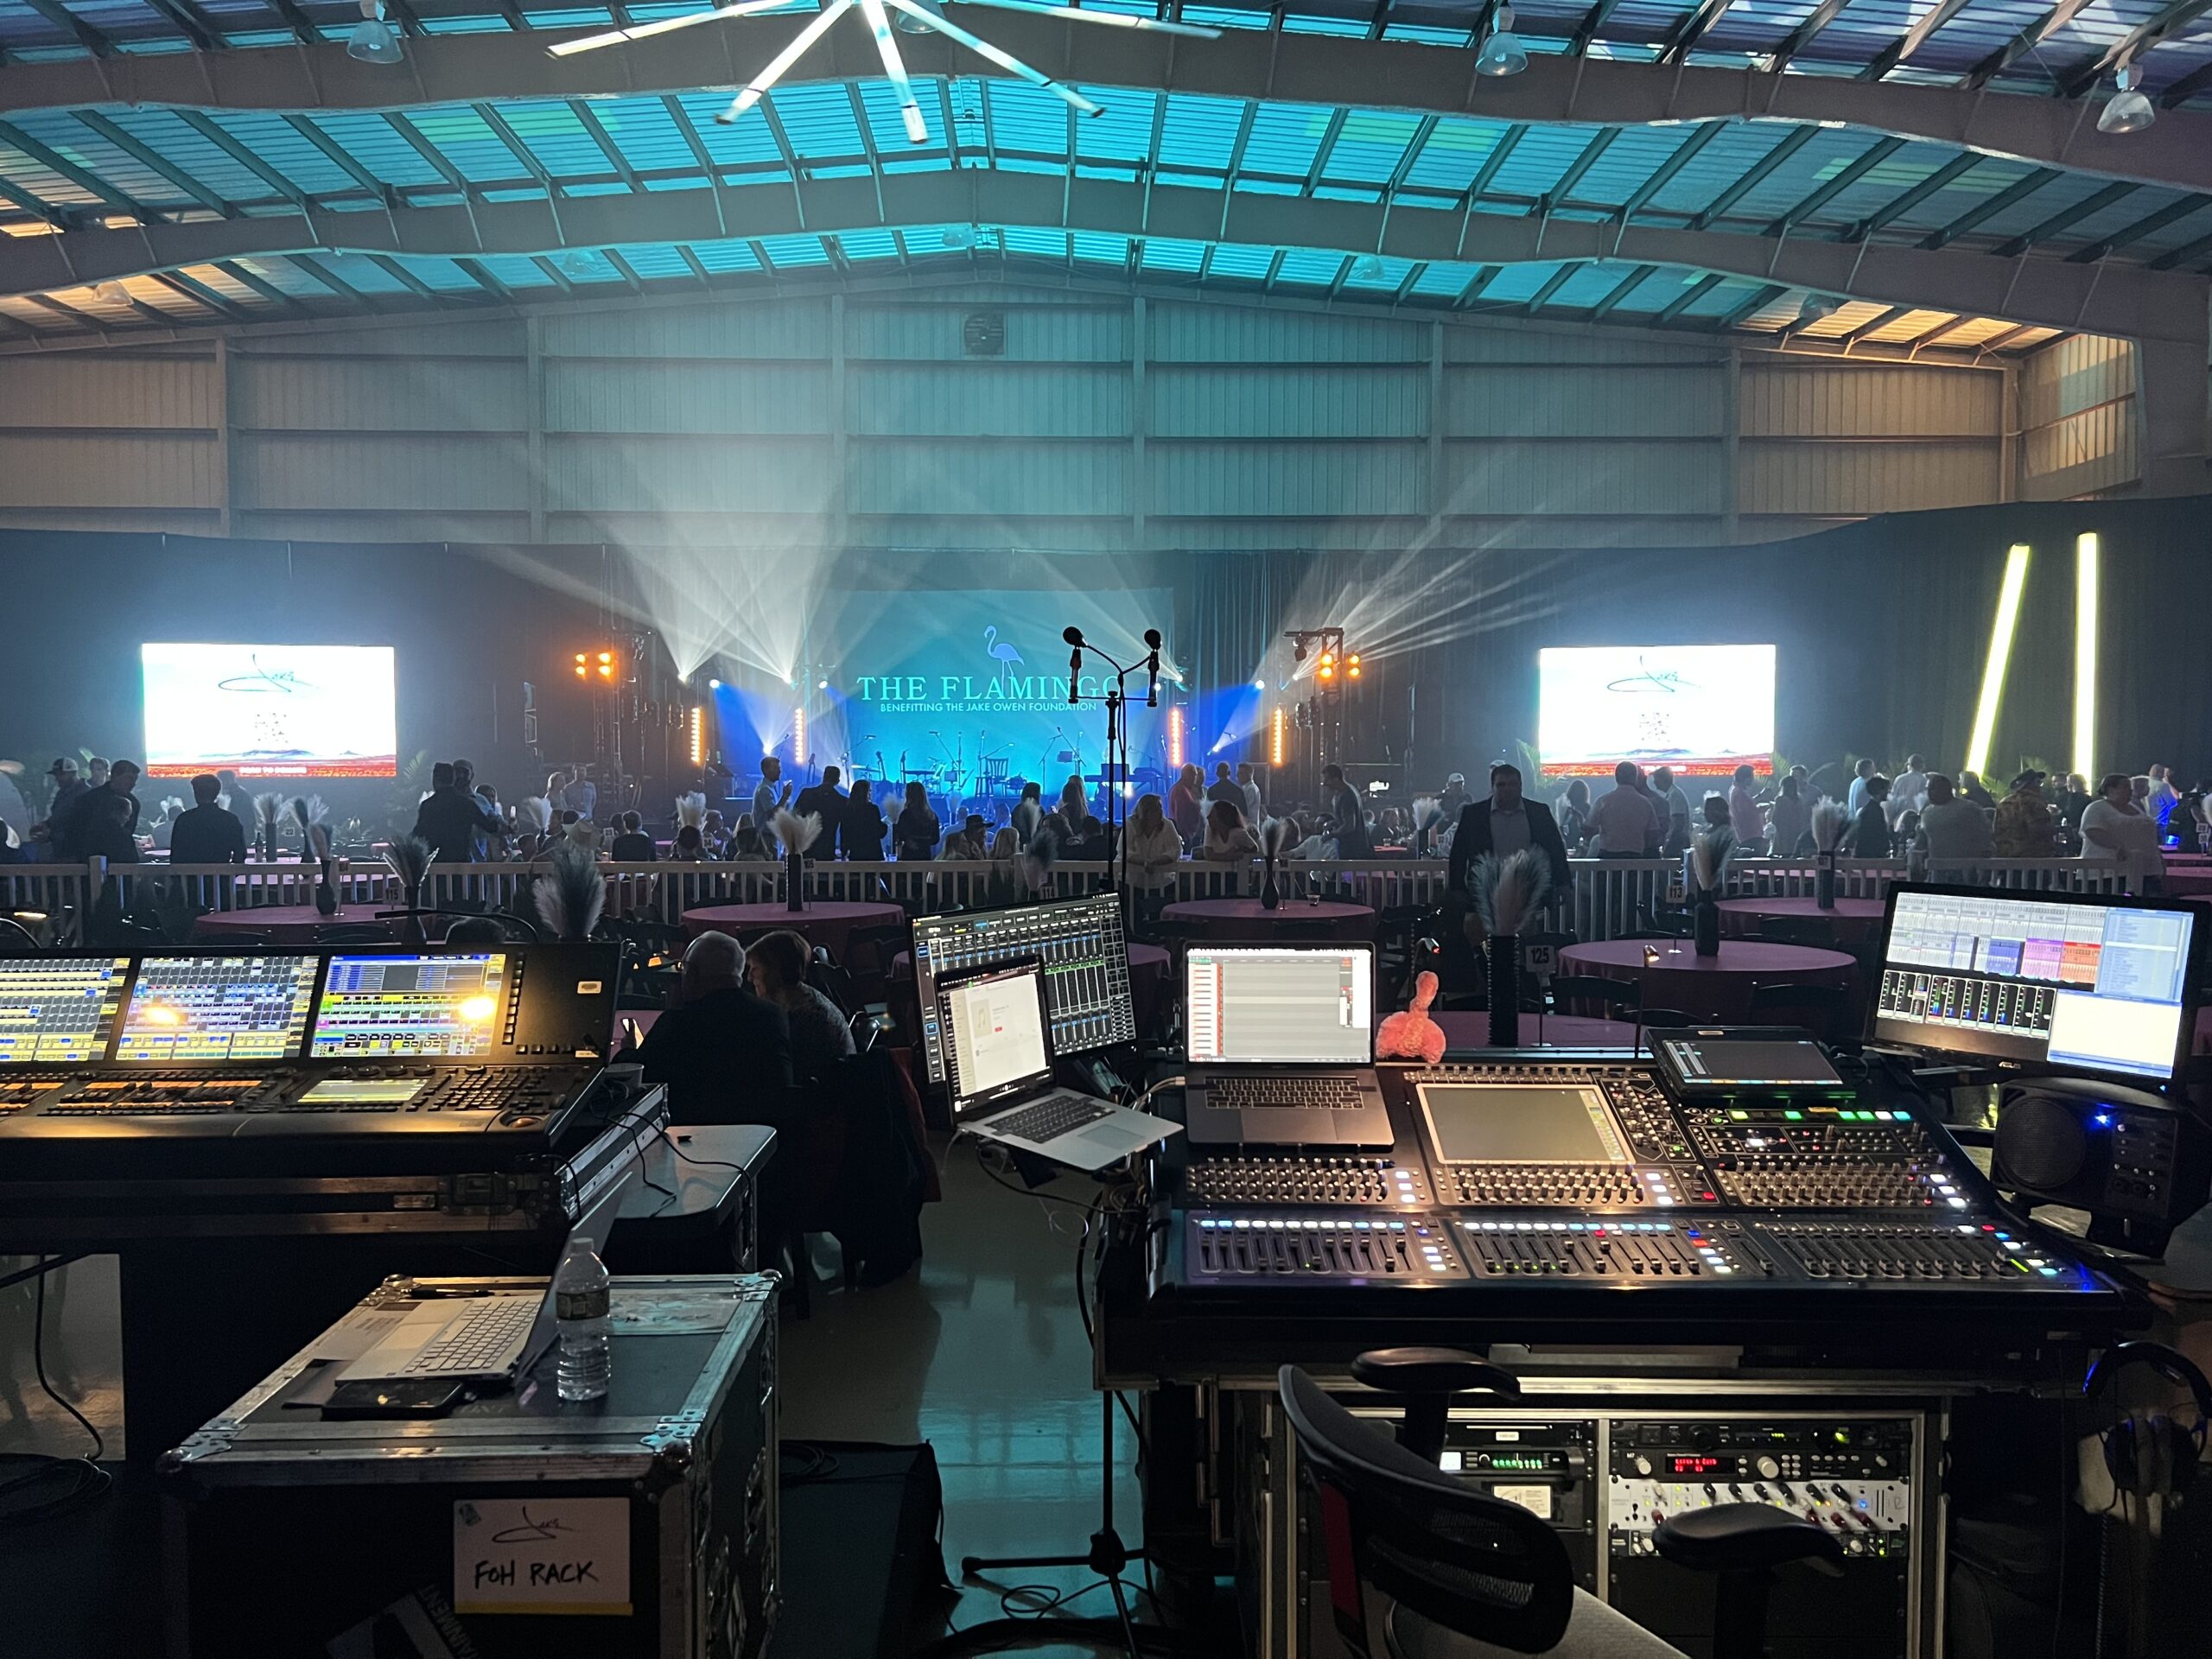 An indoor concert event featuring multiple mixing consoles and digital audio workstations in the foreground, with a crowded audience and a live performance in the background illuminated by stage lights.